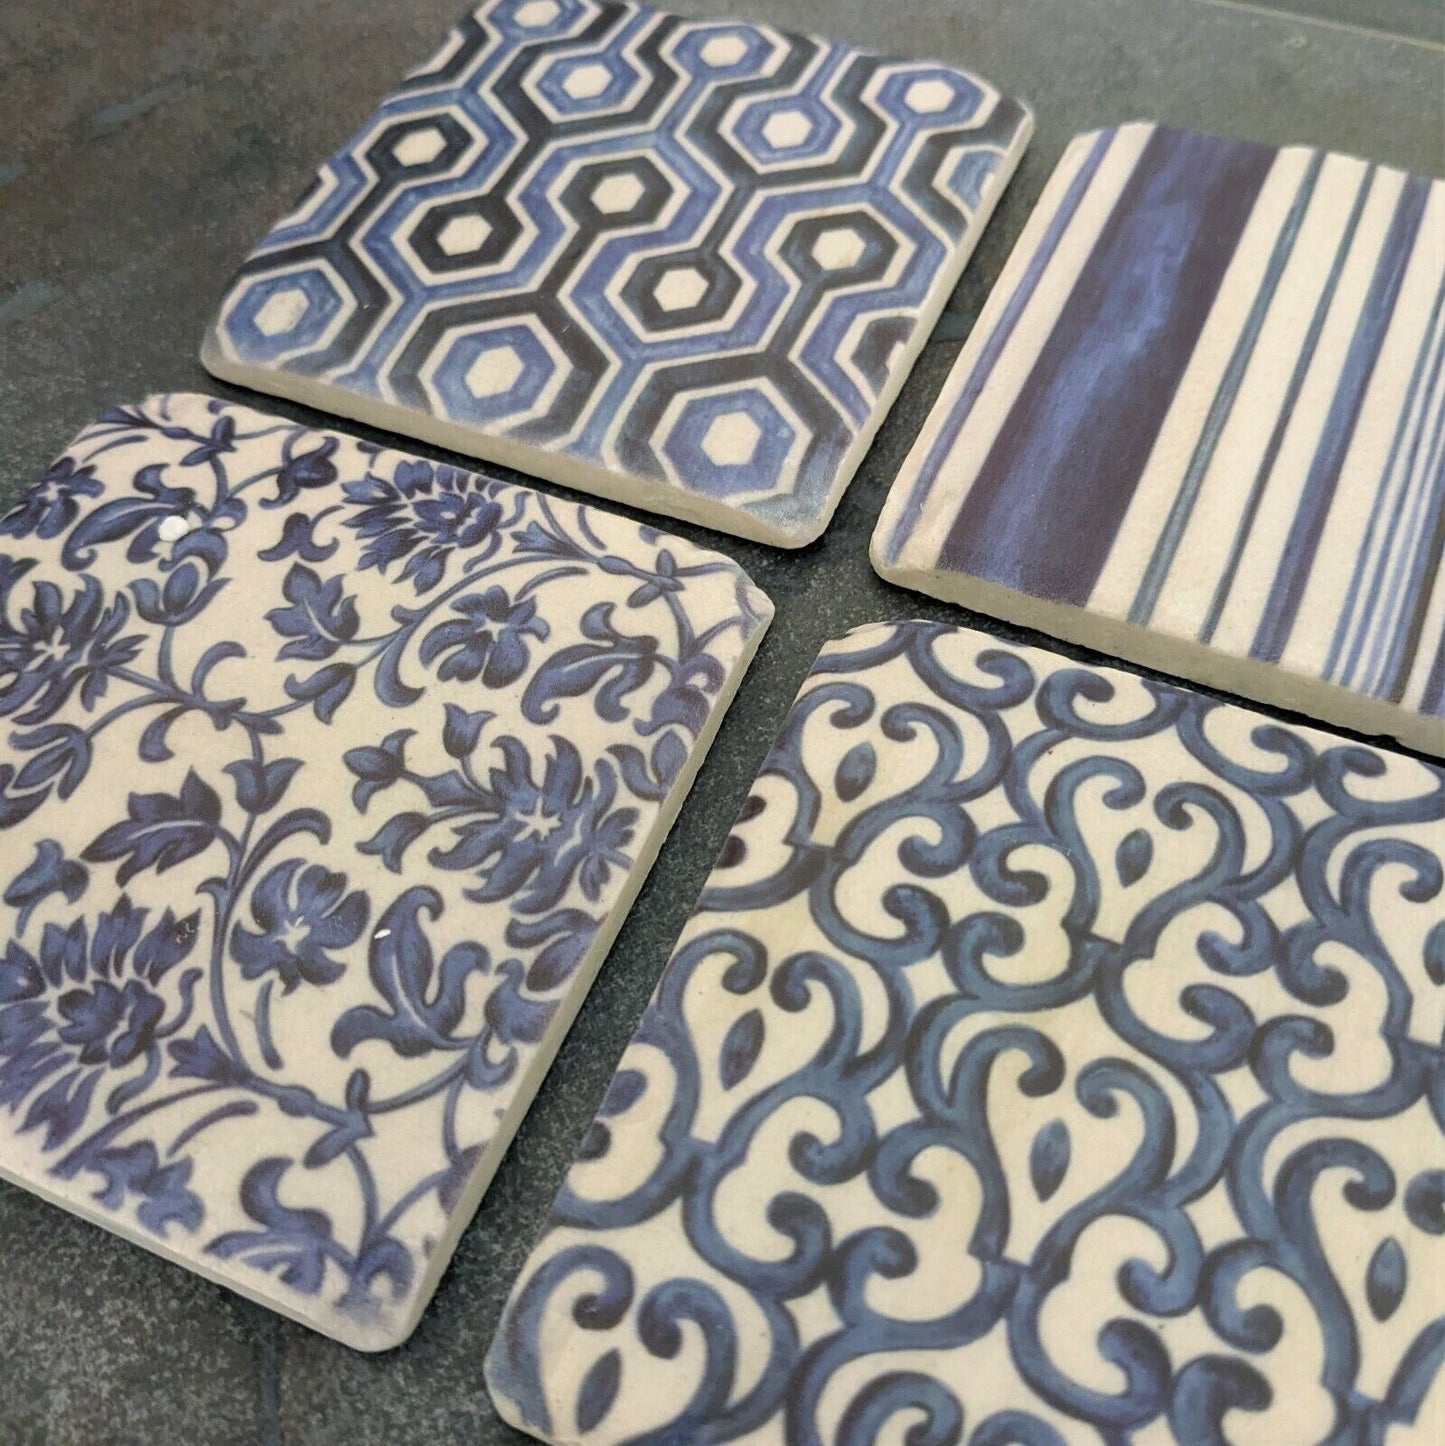 Ceramic Coasters Set of 4 Blue Geometric Willow Cork Backed Coasters Table Mats